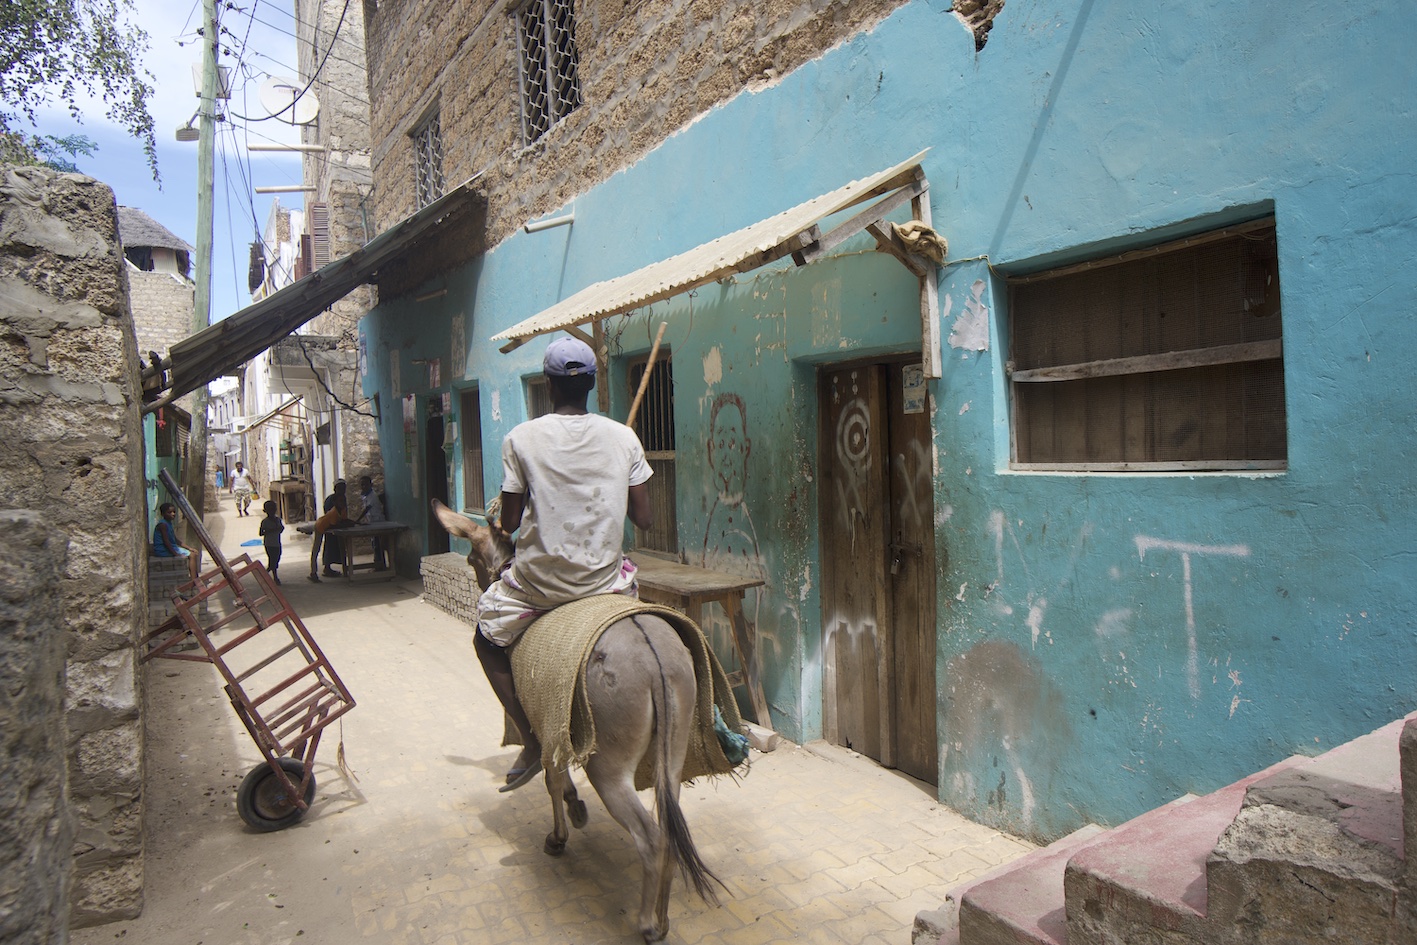 Man from behind riding a donkey in Shela village